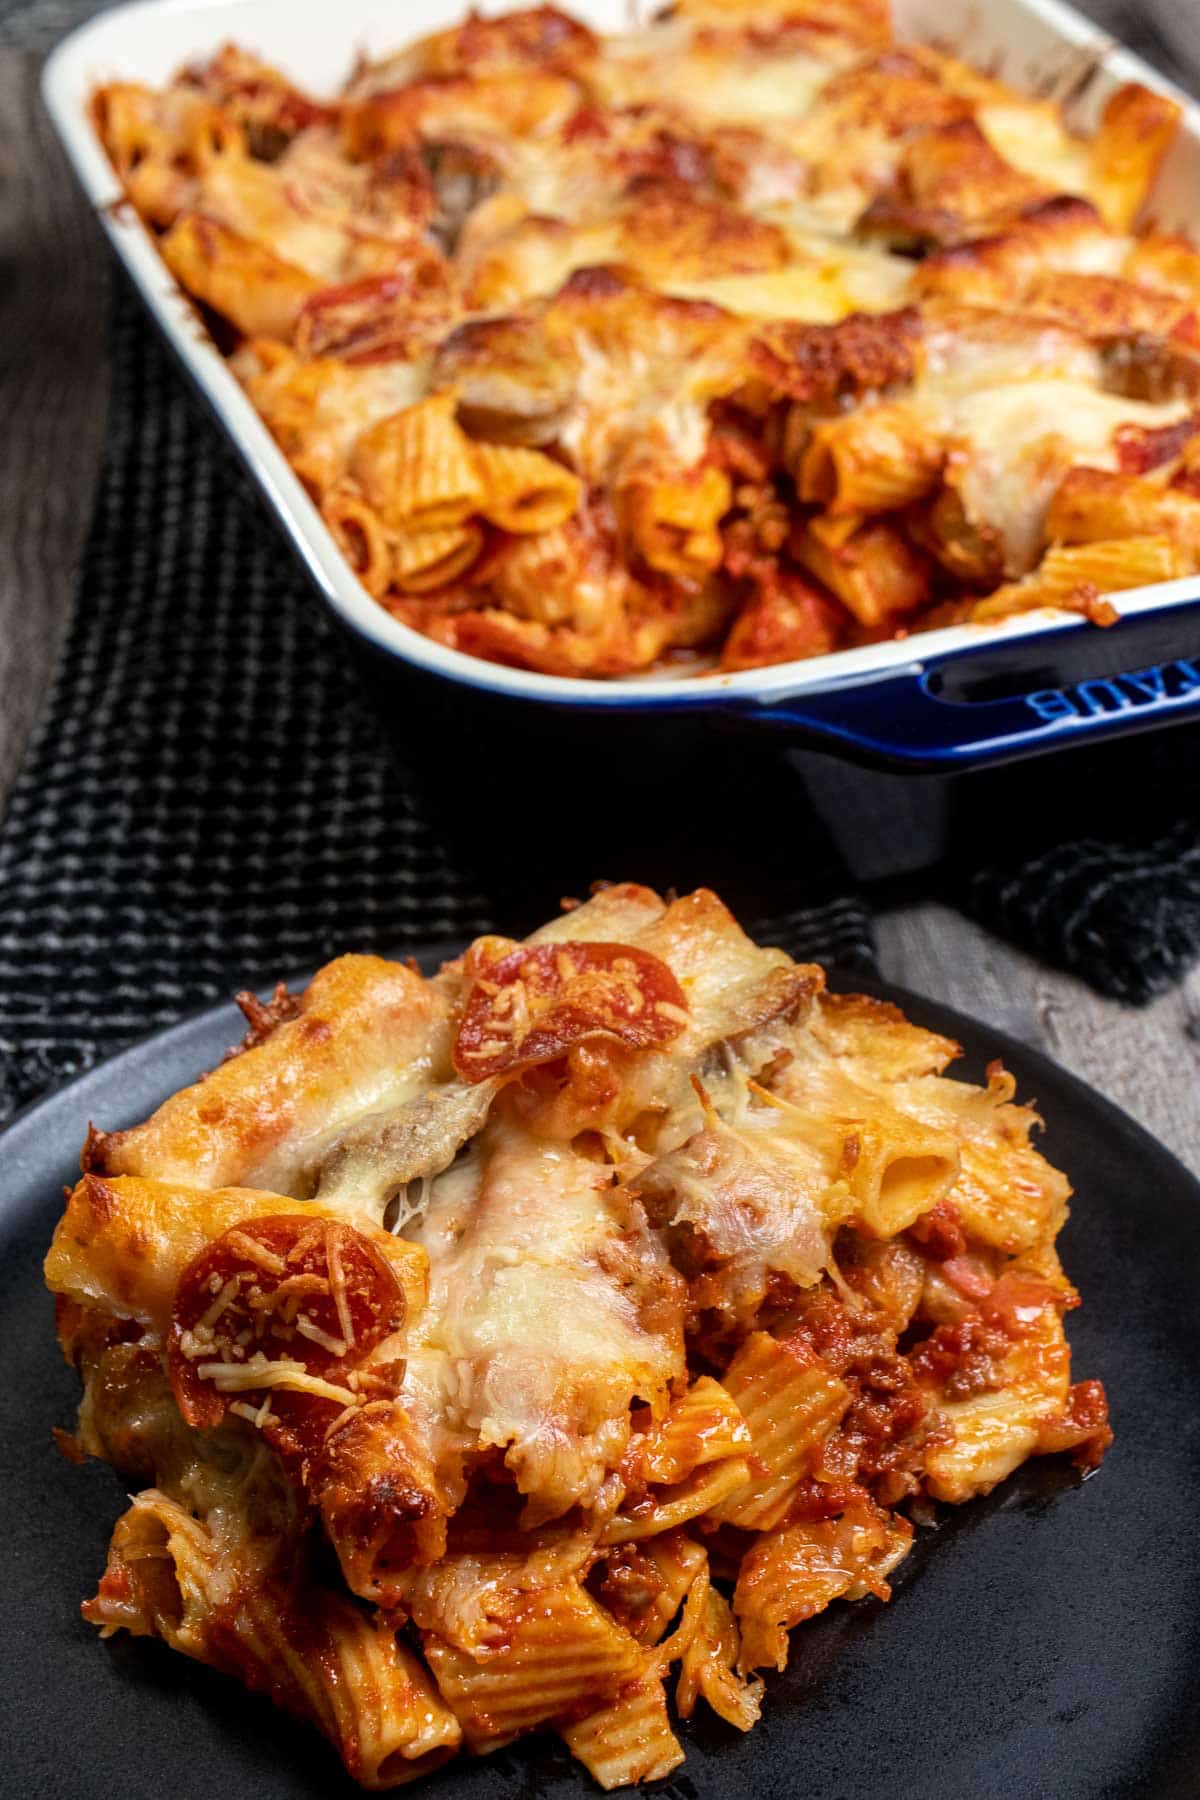 Large portion of baked rigatoni filled with sausage and meatballs on a black plate, with the rest of the baked pasta behind it.